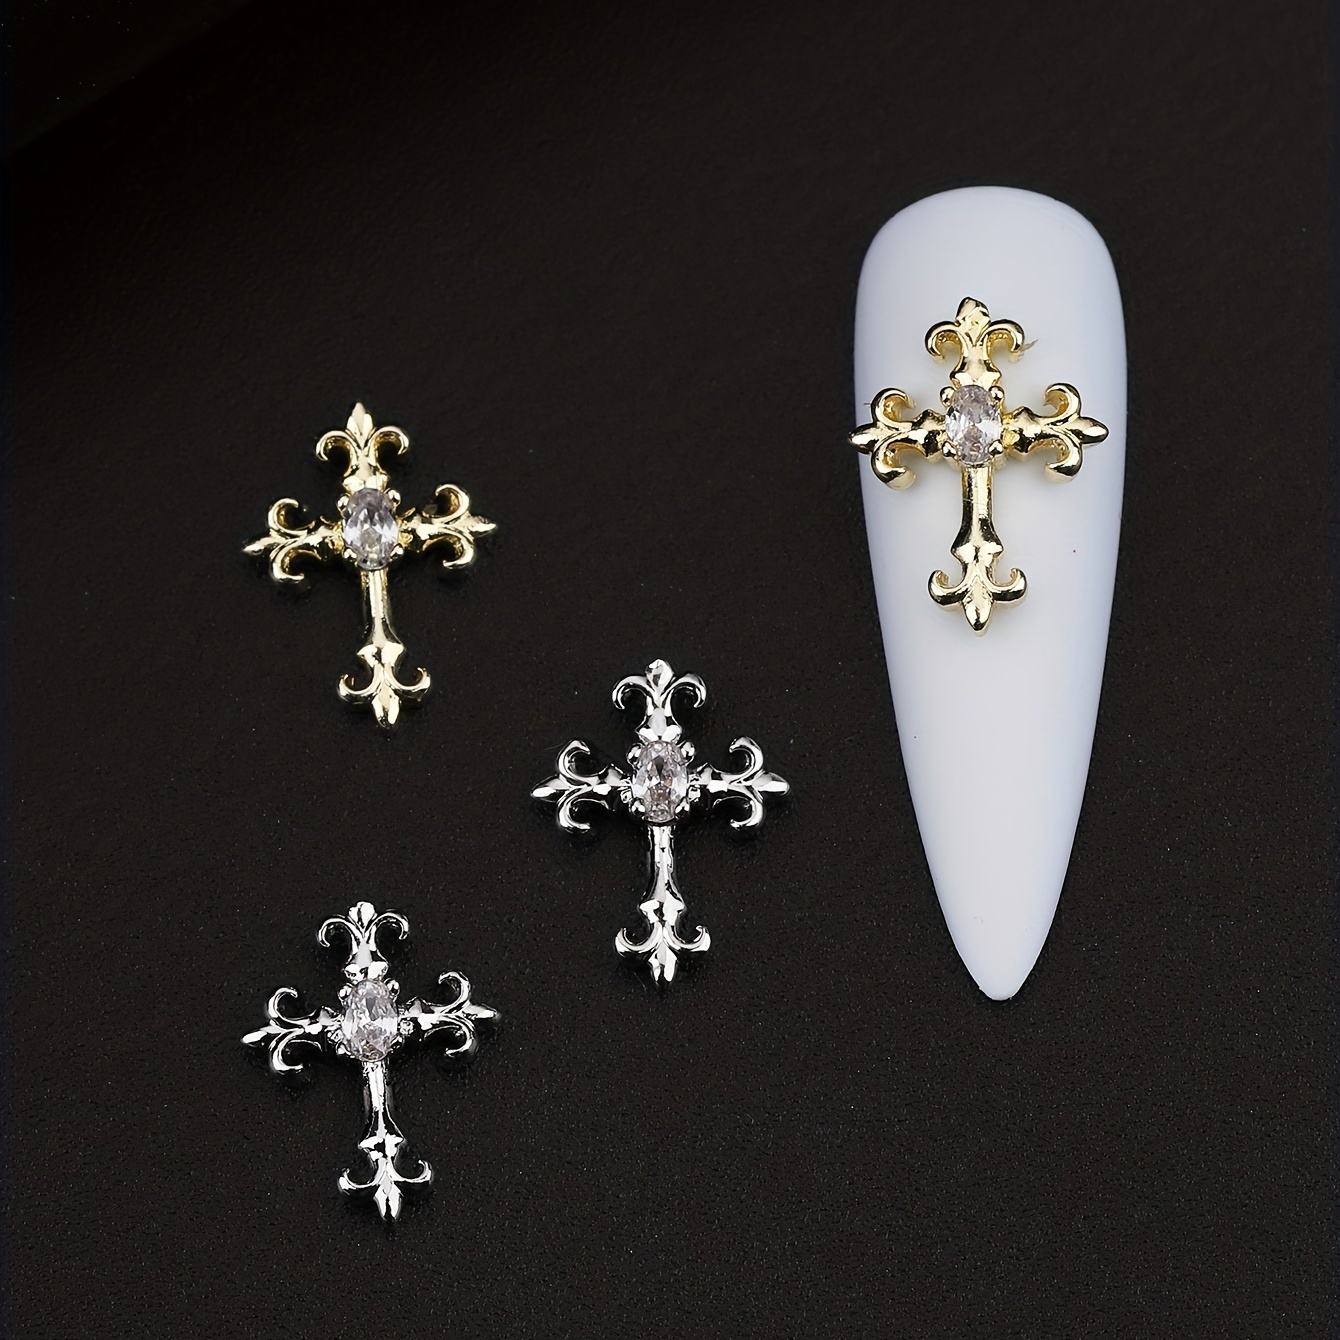 Silver antique Cross nail Decals Gold Christian Nails charms